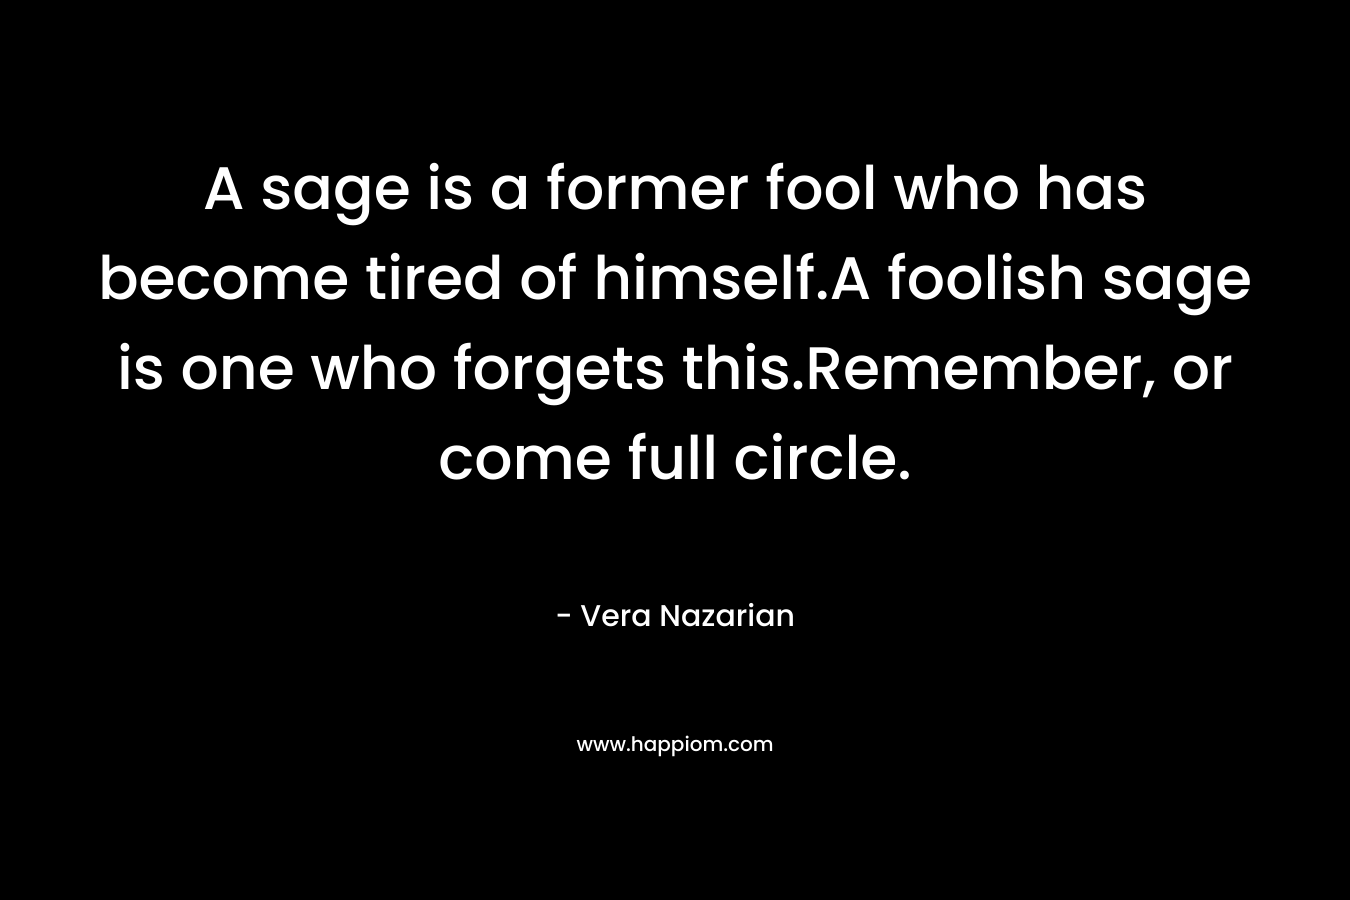 A sage is a former fool who has become tired of himself.A foolish sage is one who forgets this.Remember, or come full circle. – Vera Nazarian